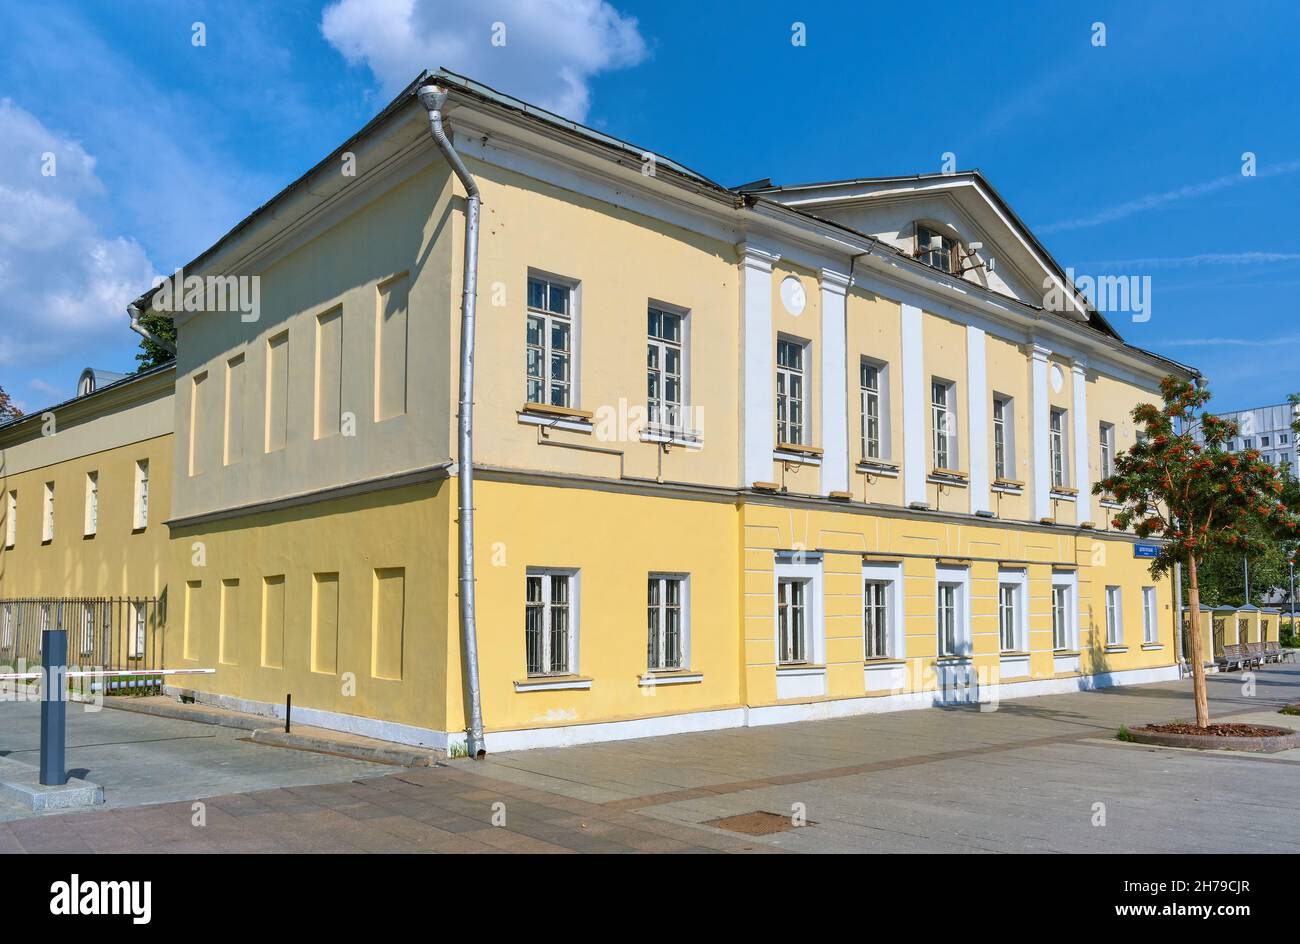 Former home of Count Ostermann, currently All-Russian Museum of Decorative, Applied and Folk Art: Moscow, Russia - September 13, 2021 Stock Photo